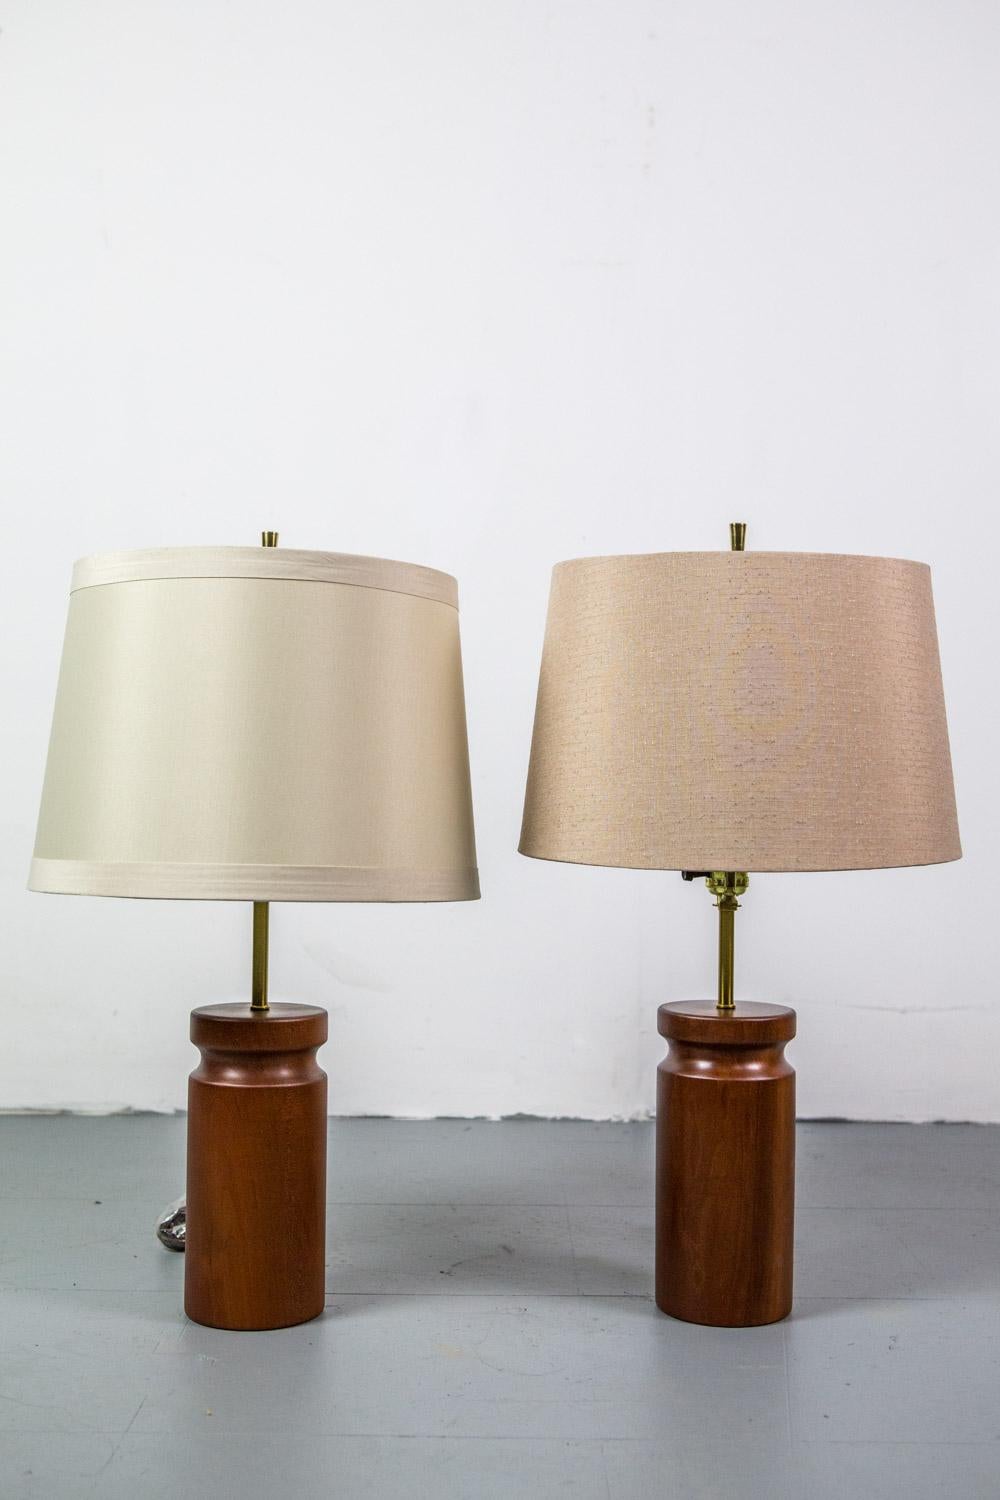 Rare pair of table lamps by Arden Riddle in cherry.
To be on the the safe side, the lamp should be checked locally by a specialist concerning local requirements.
